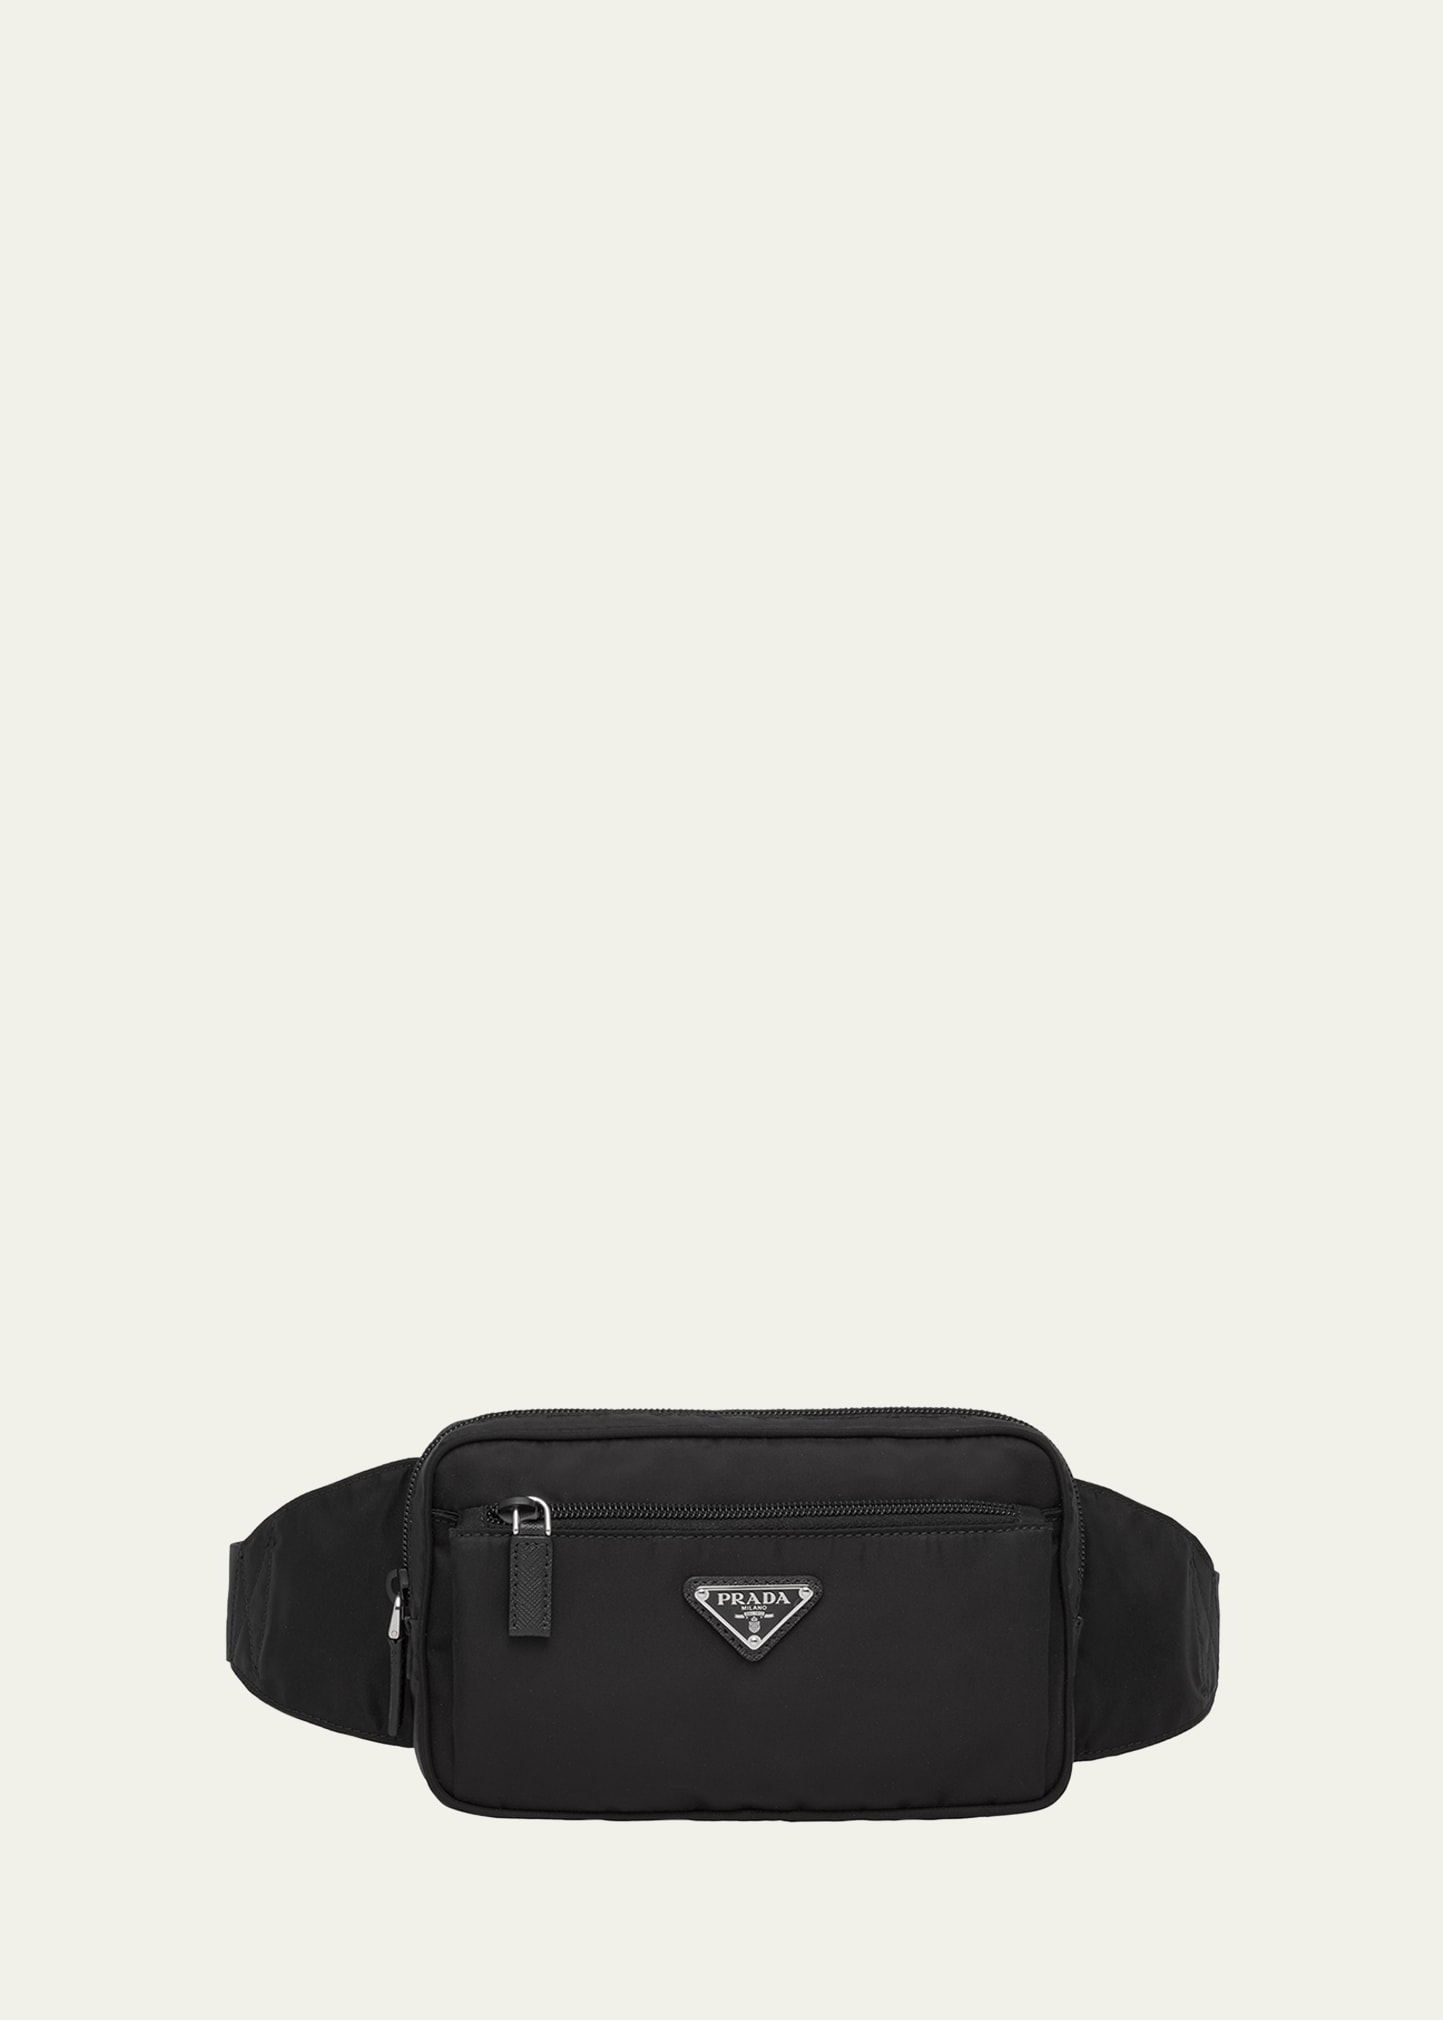 Prada Re-Nylon and Saffiano Leather Travel Pouch - Black One-Size